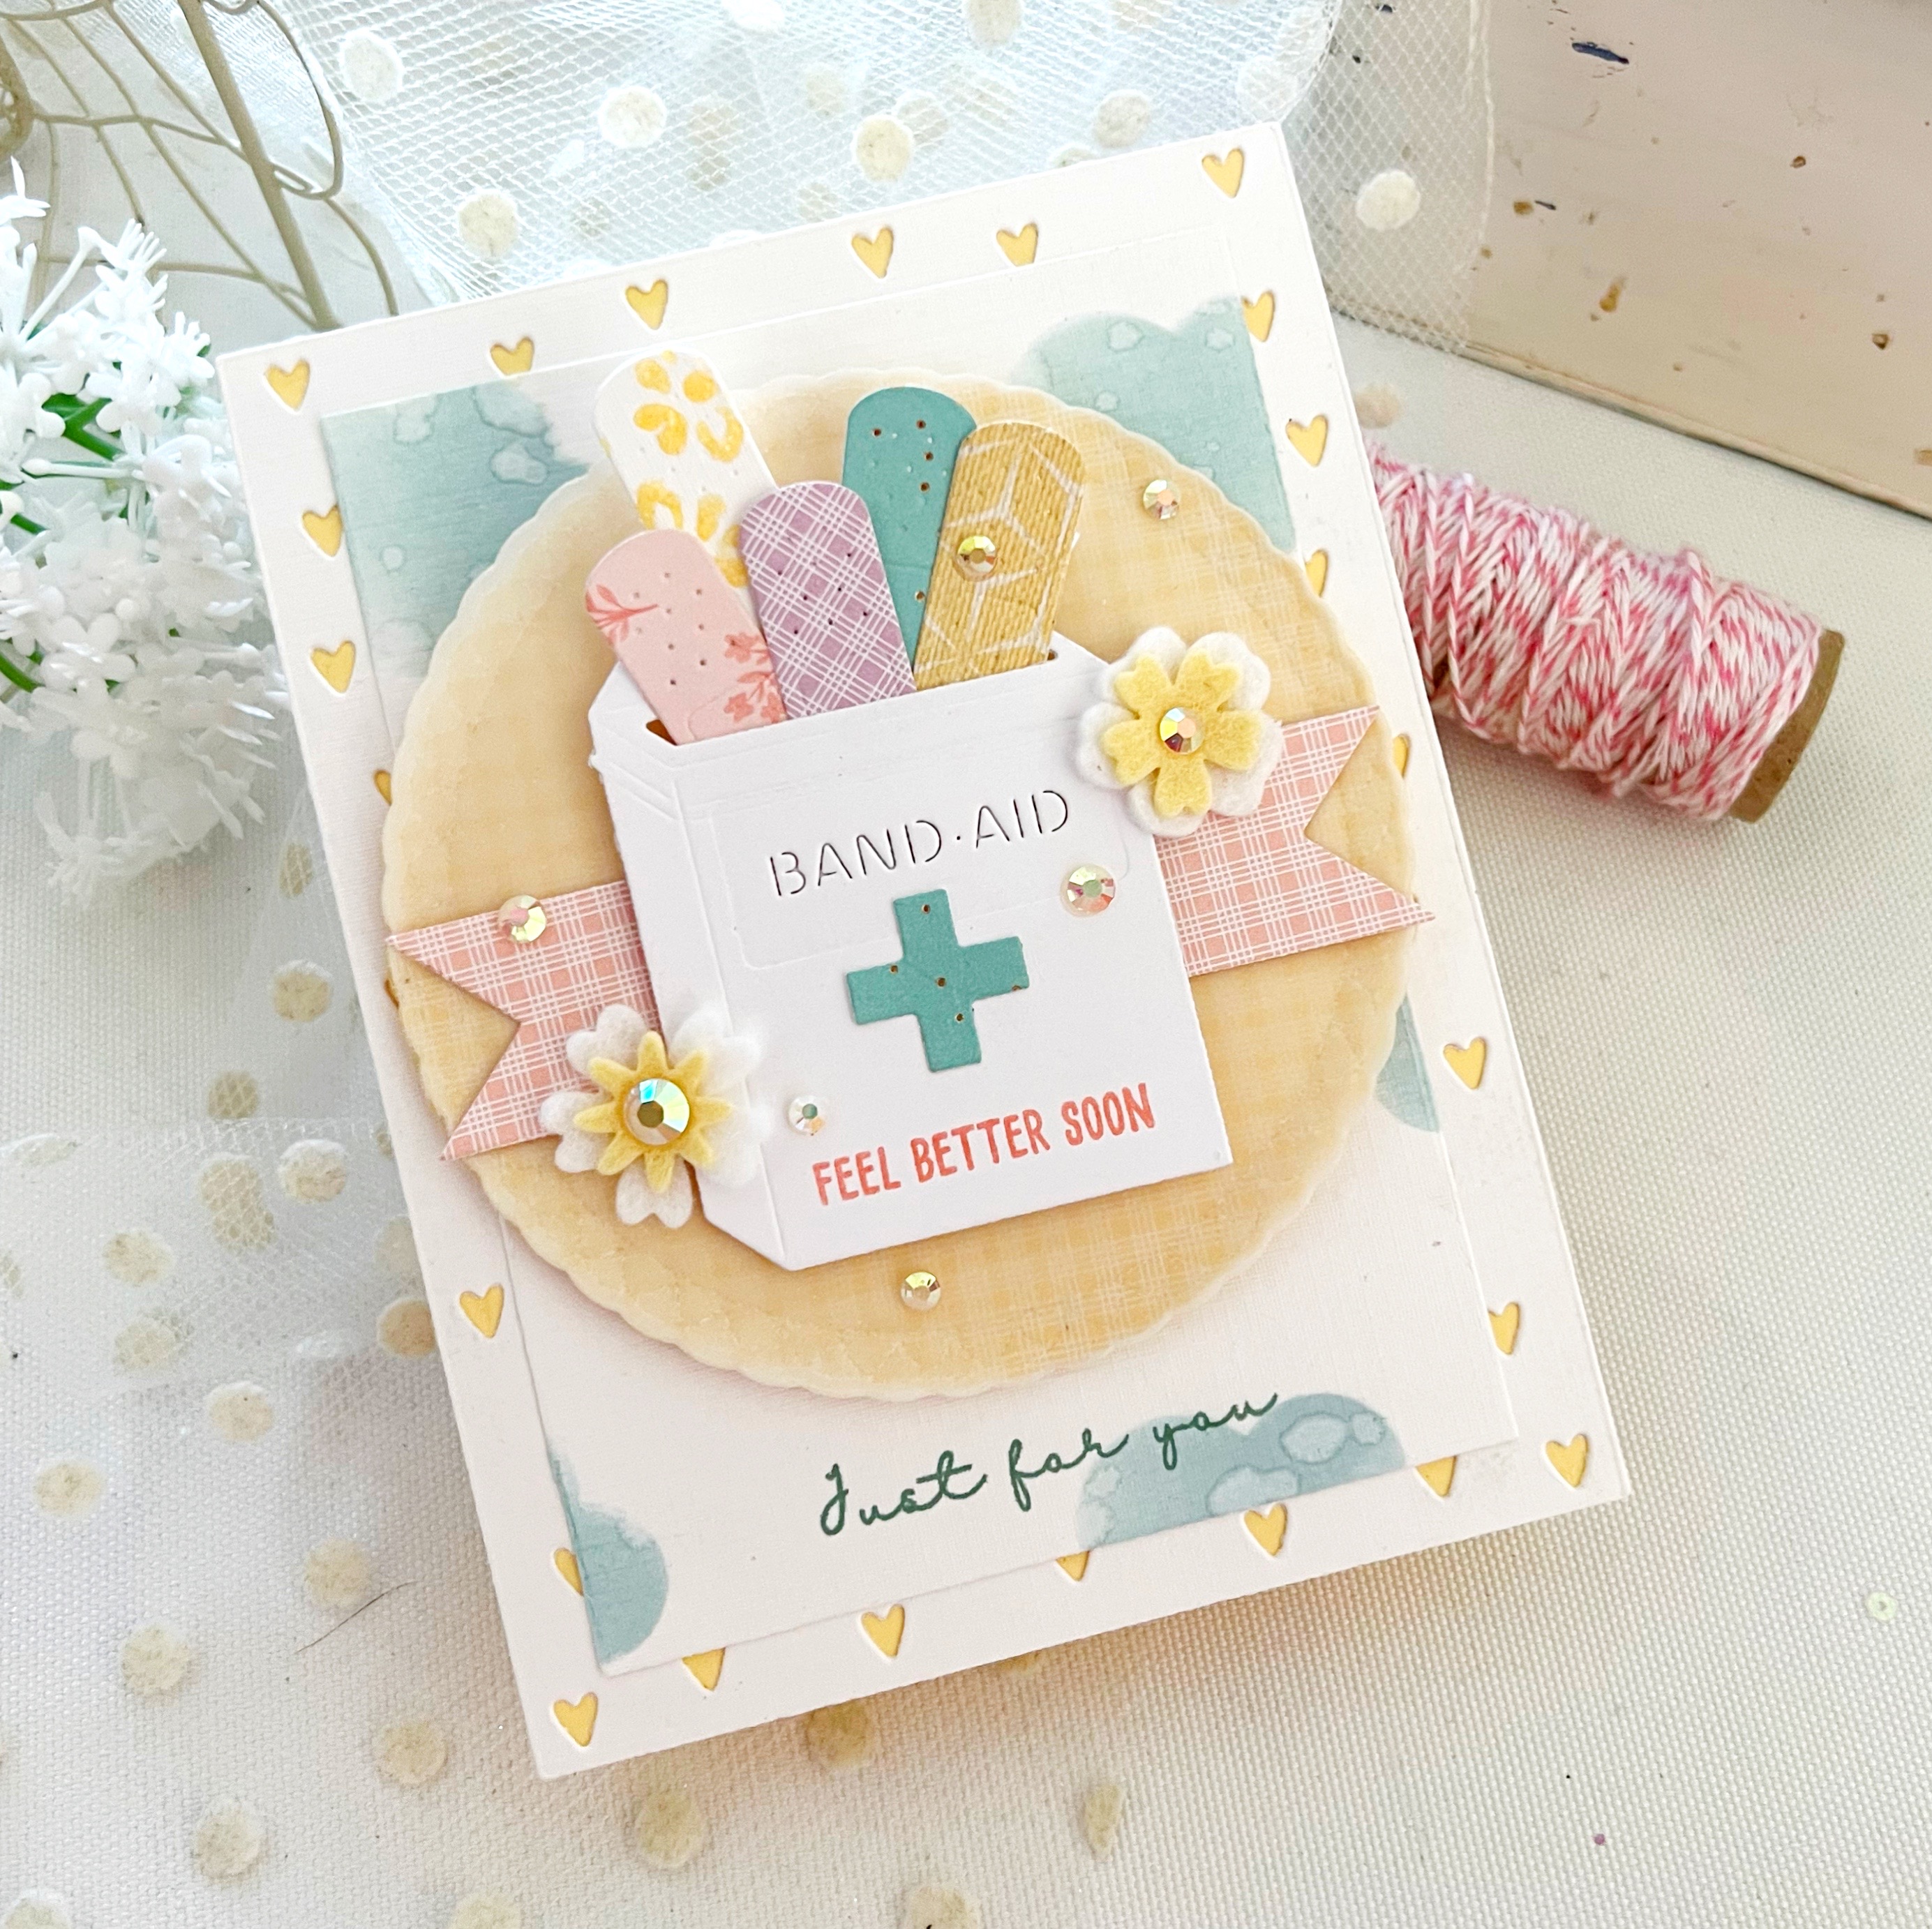 Band-aid Wishes Stamp Set